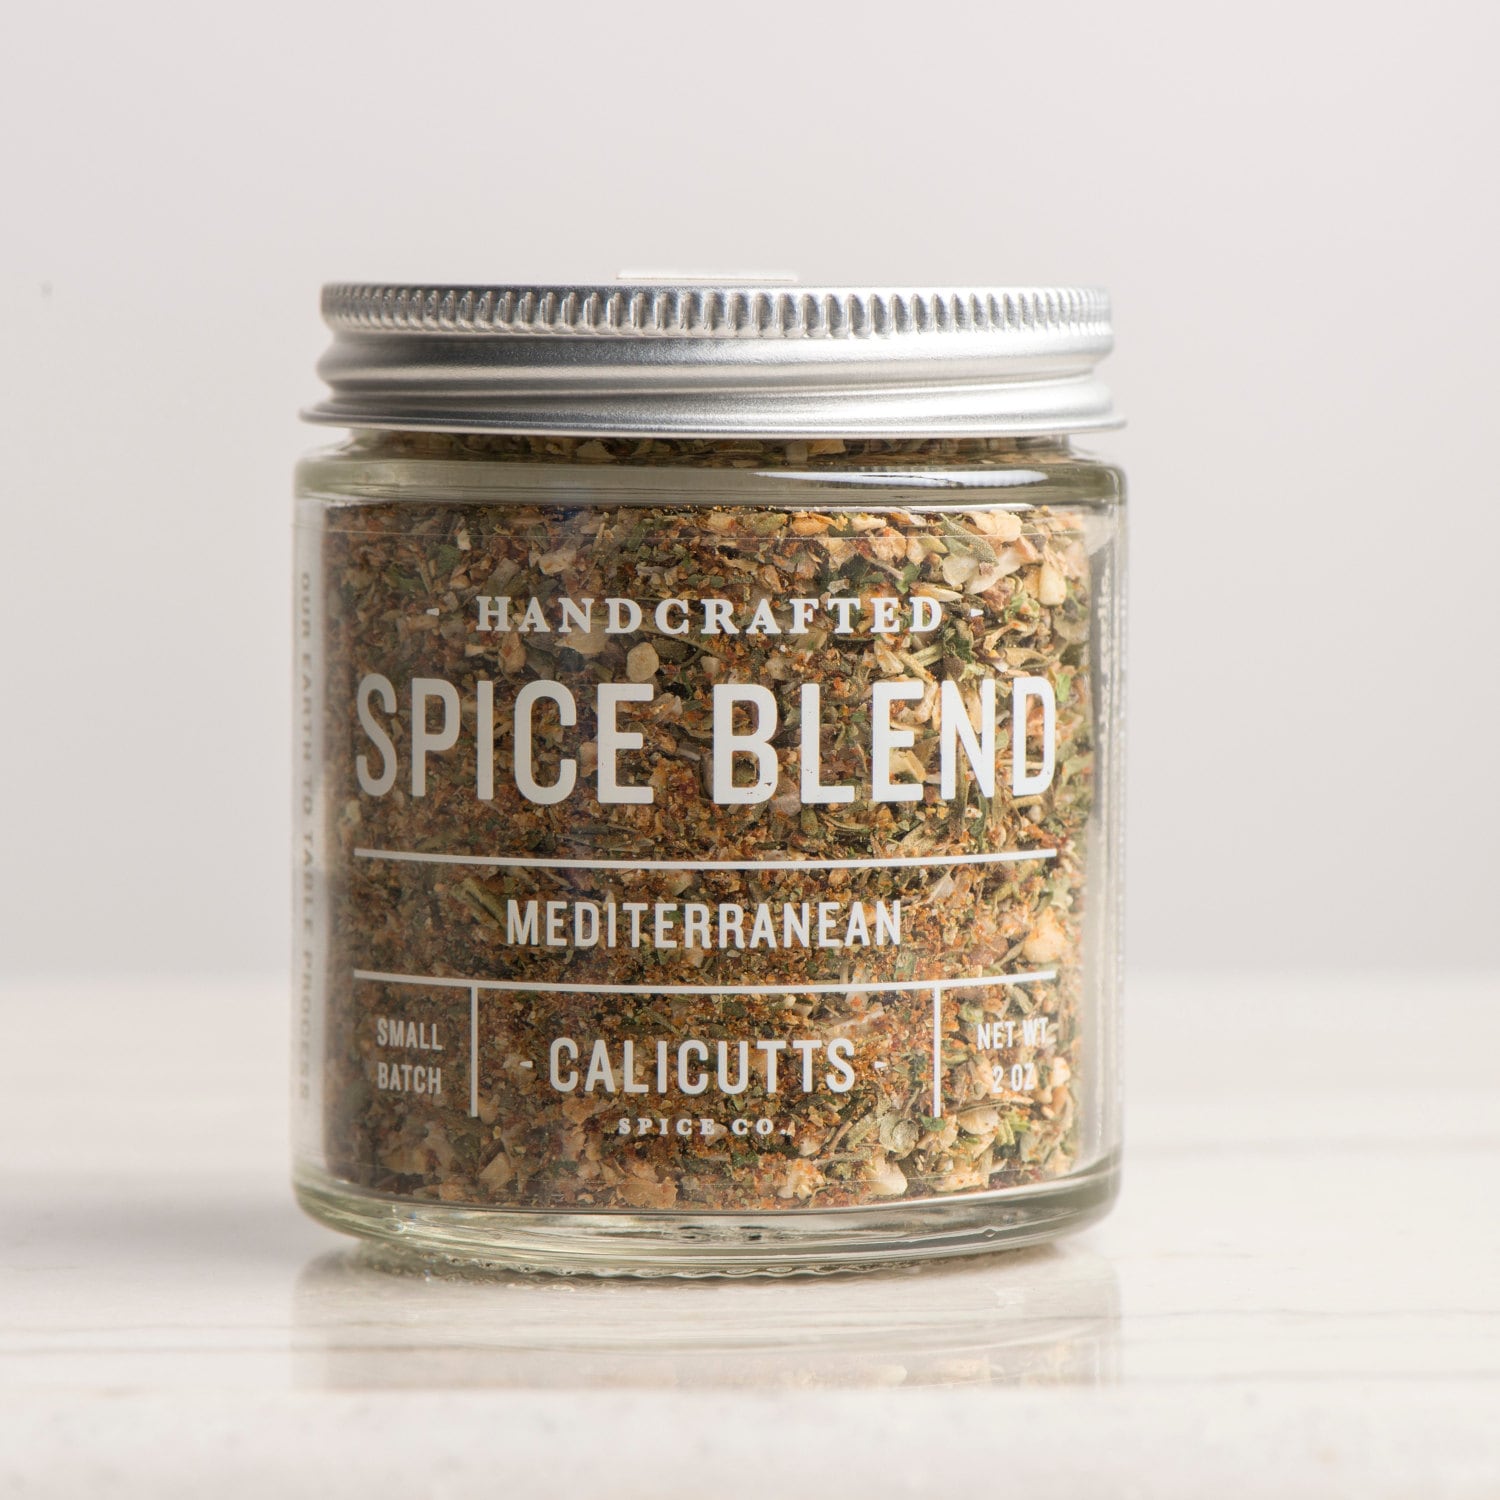 Mediterranean - Handcrafted Spice Blend 2 Ounces in Glass Jar, All-Natural & Gluten Free